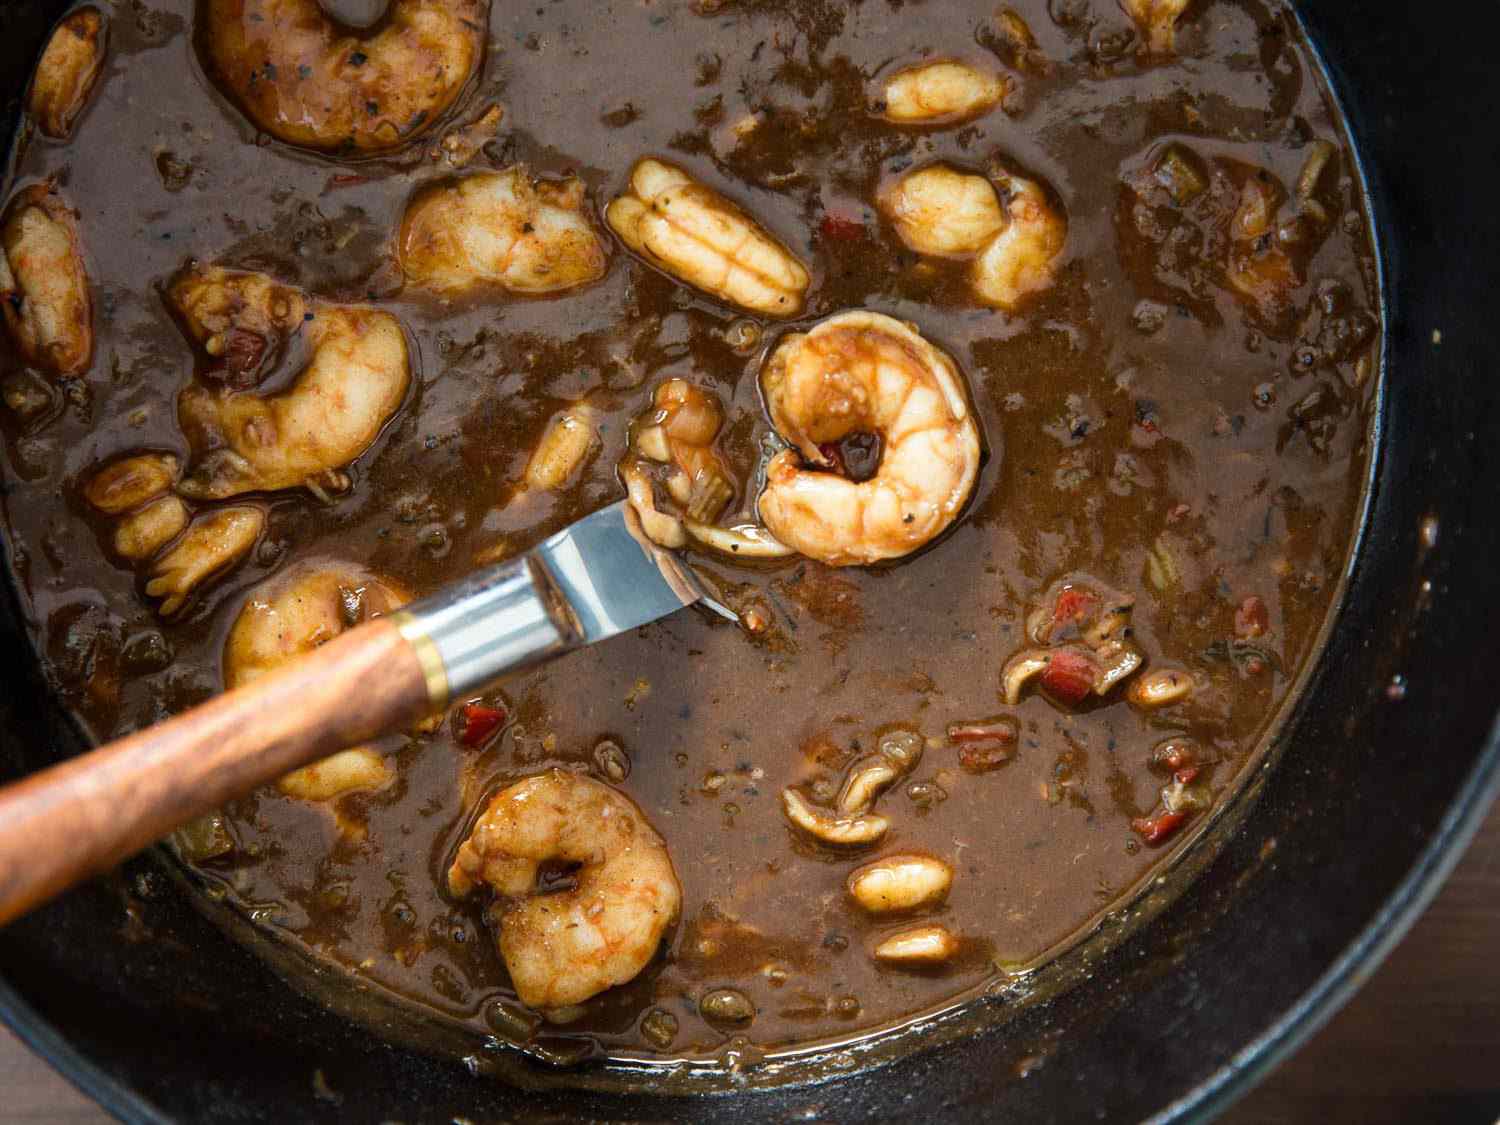 Shrimp etouffee in the pot, made with a dark brown roux.